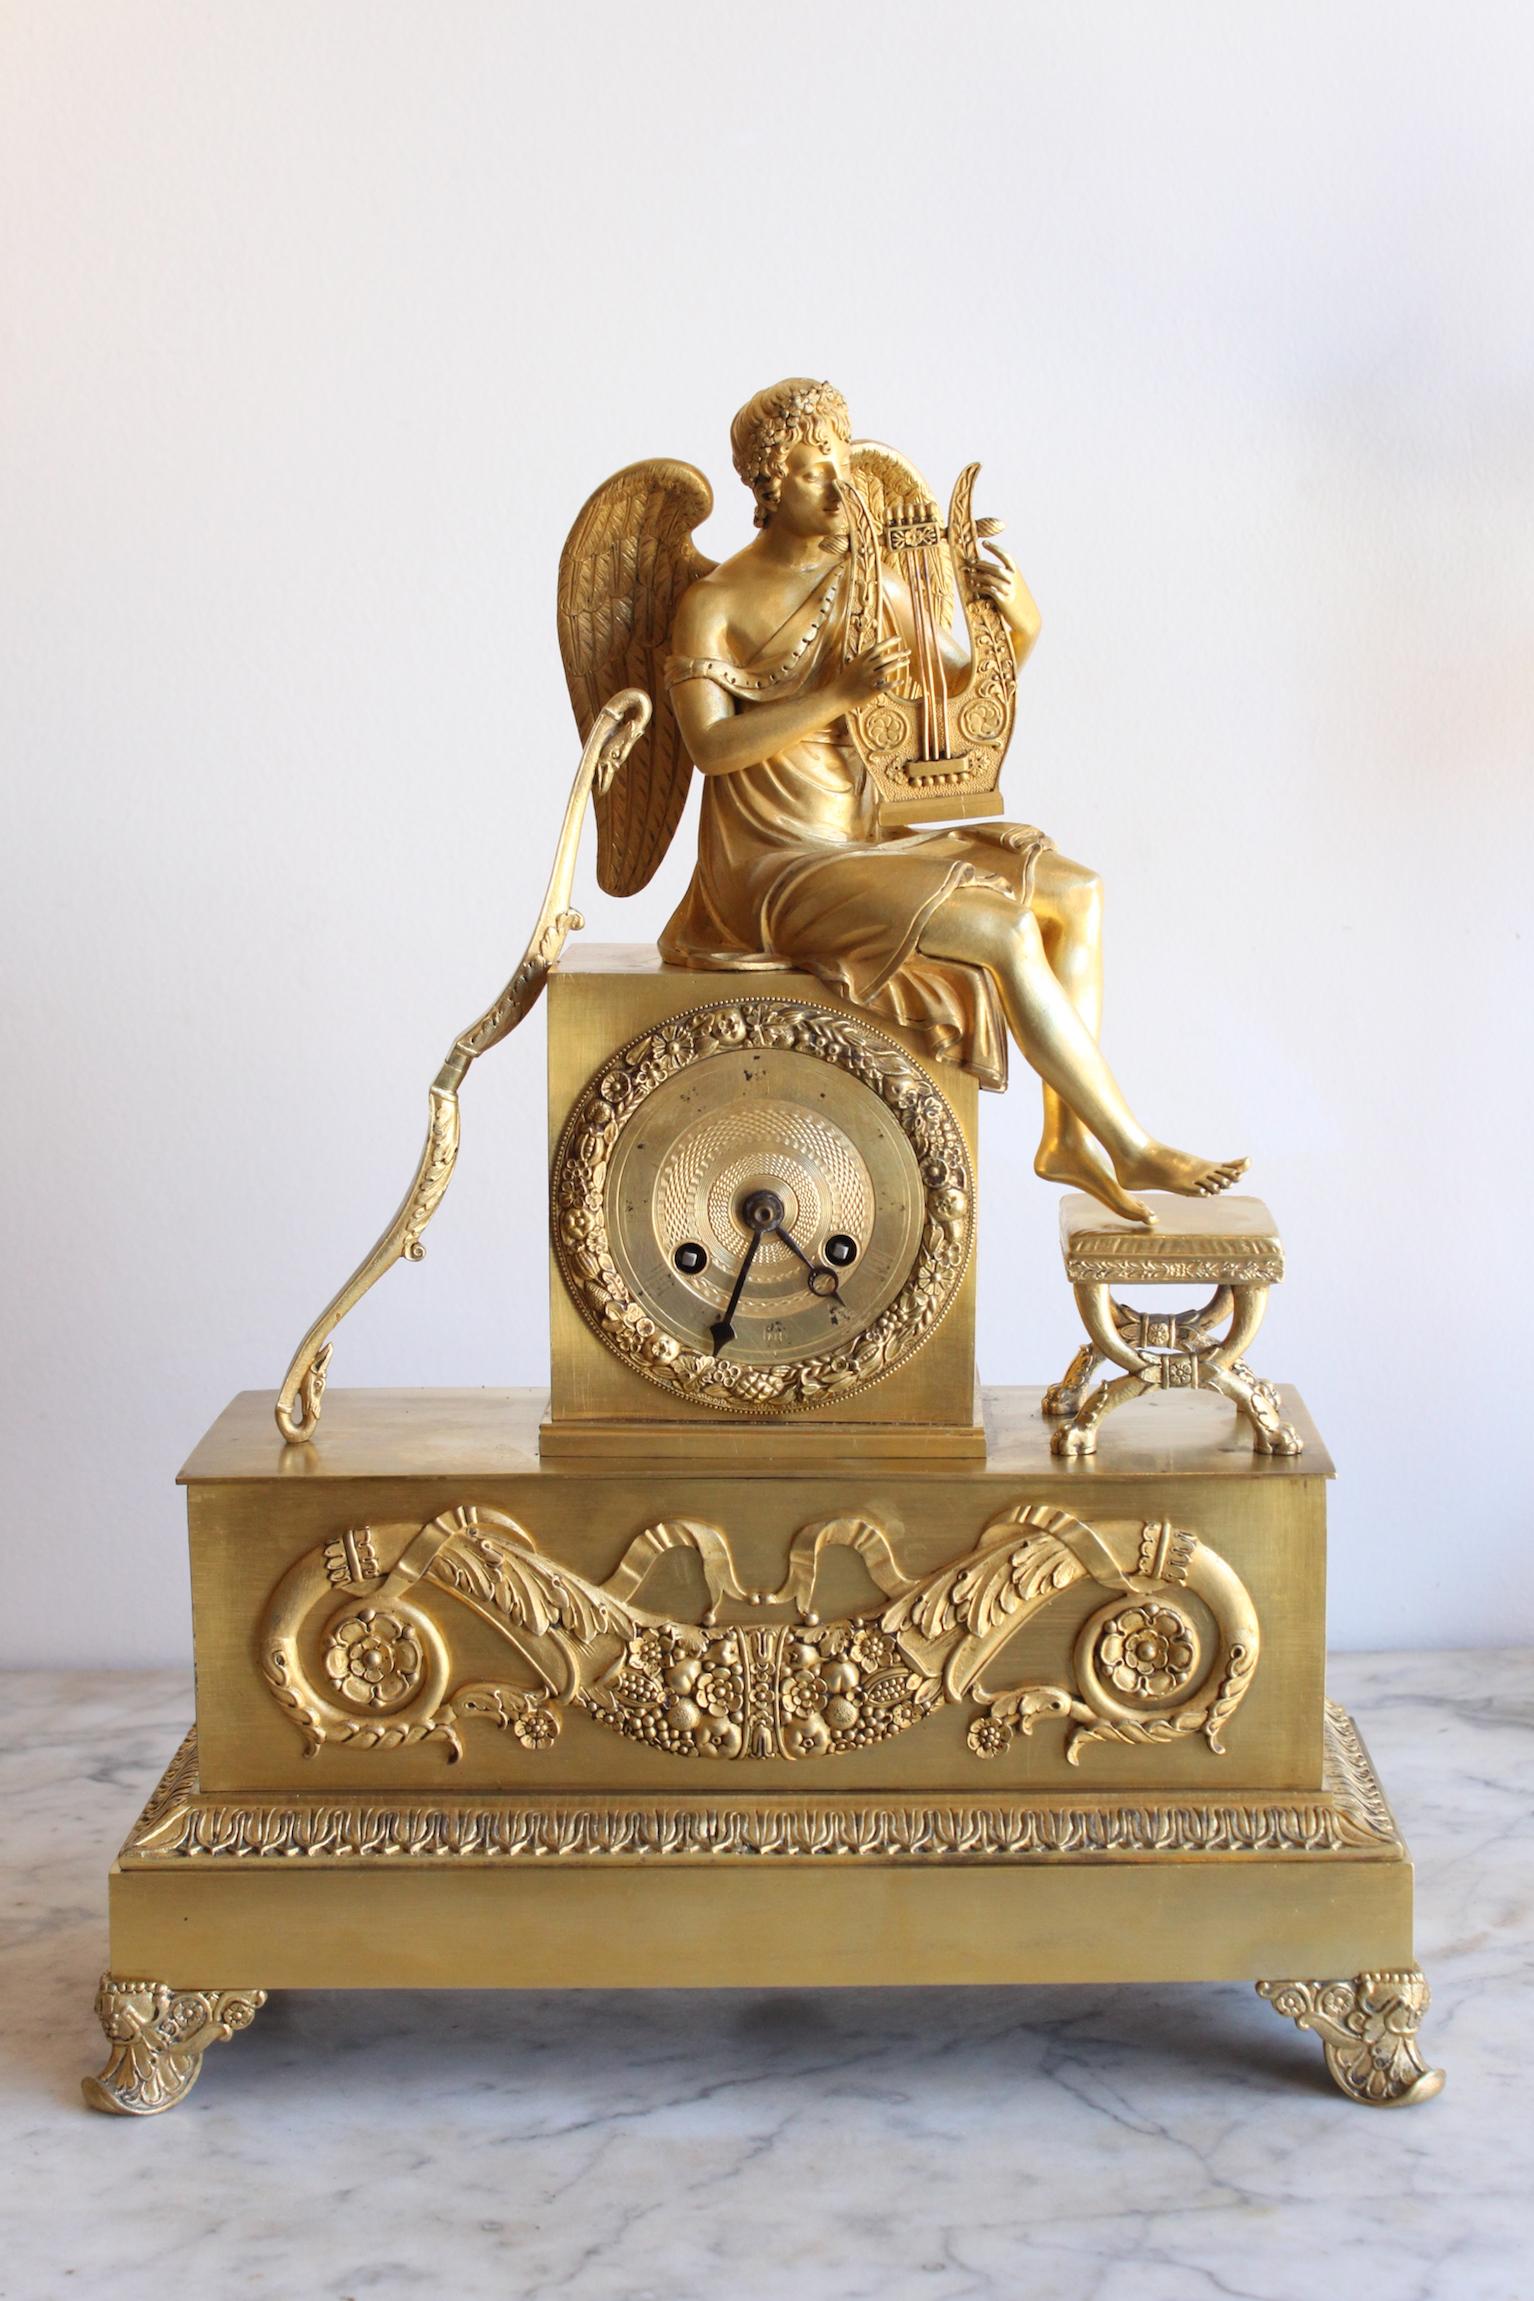 Gilt chiselled bronze clock representing an angel holding a lyre. Allegory to Love. Good condition.
Dimensions: Height 40cm, width 31cm, depth 12cm.